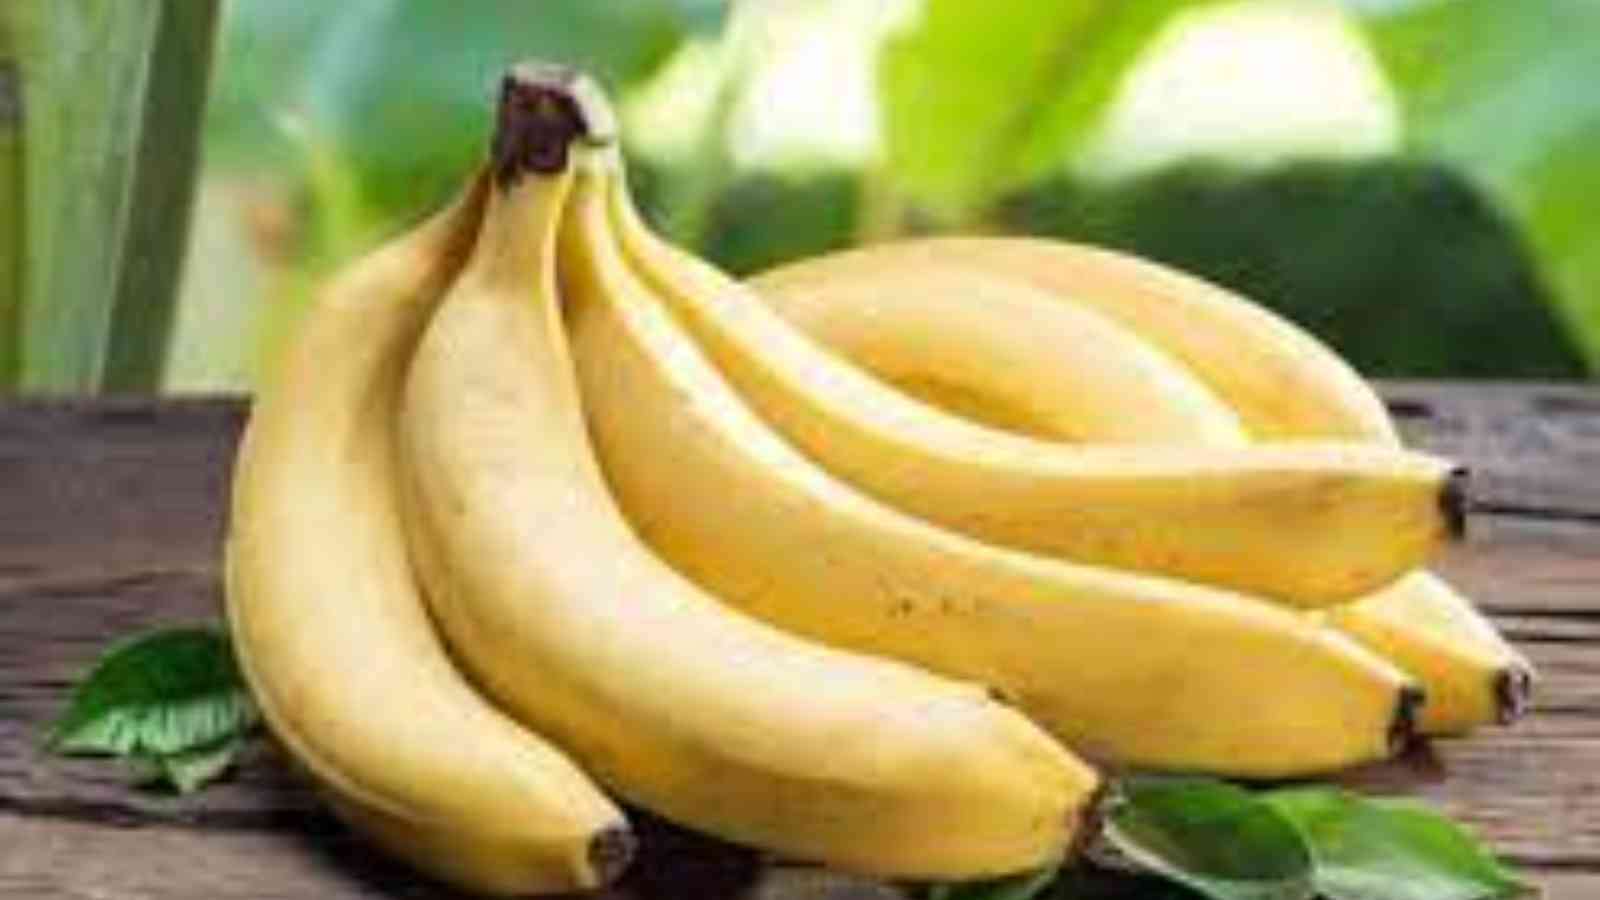 National Banana Day 2023: Date, History, Facts about Bananas